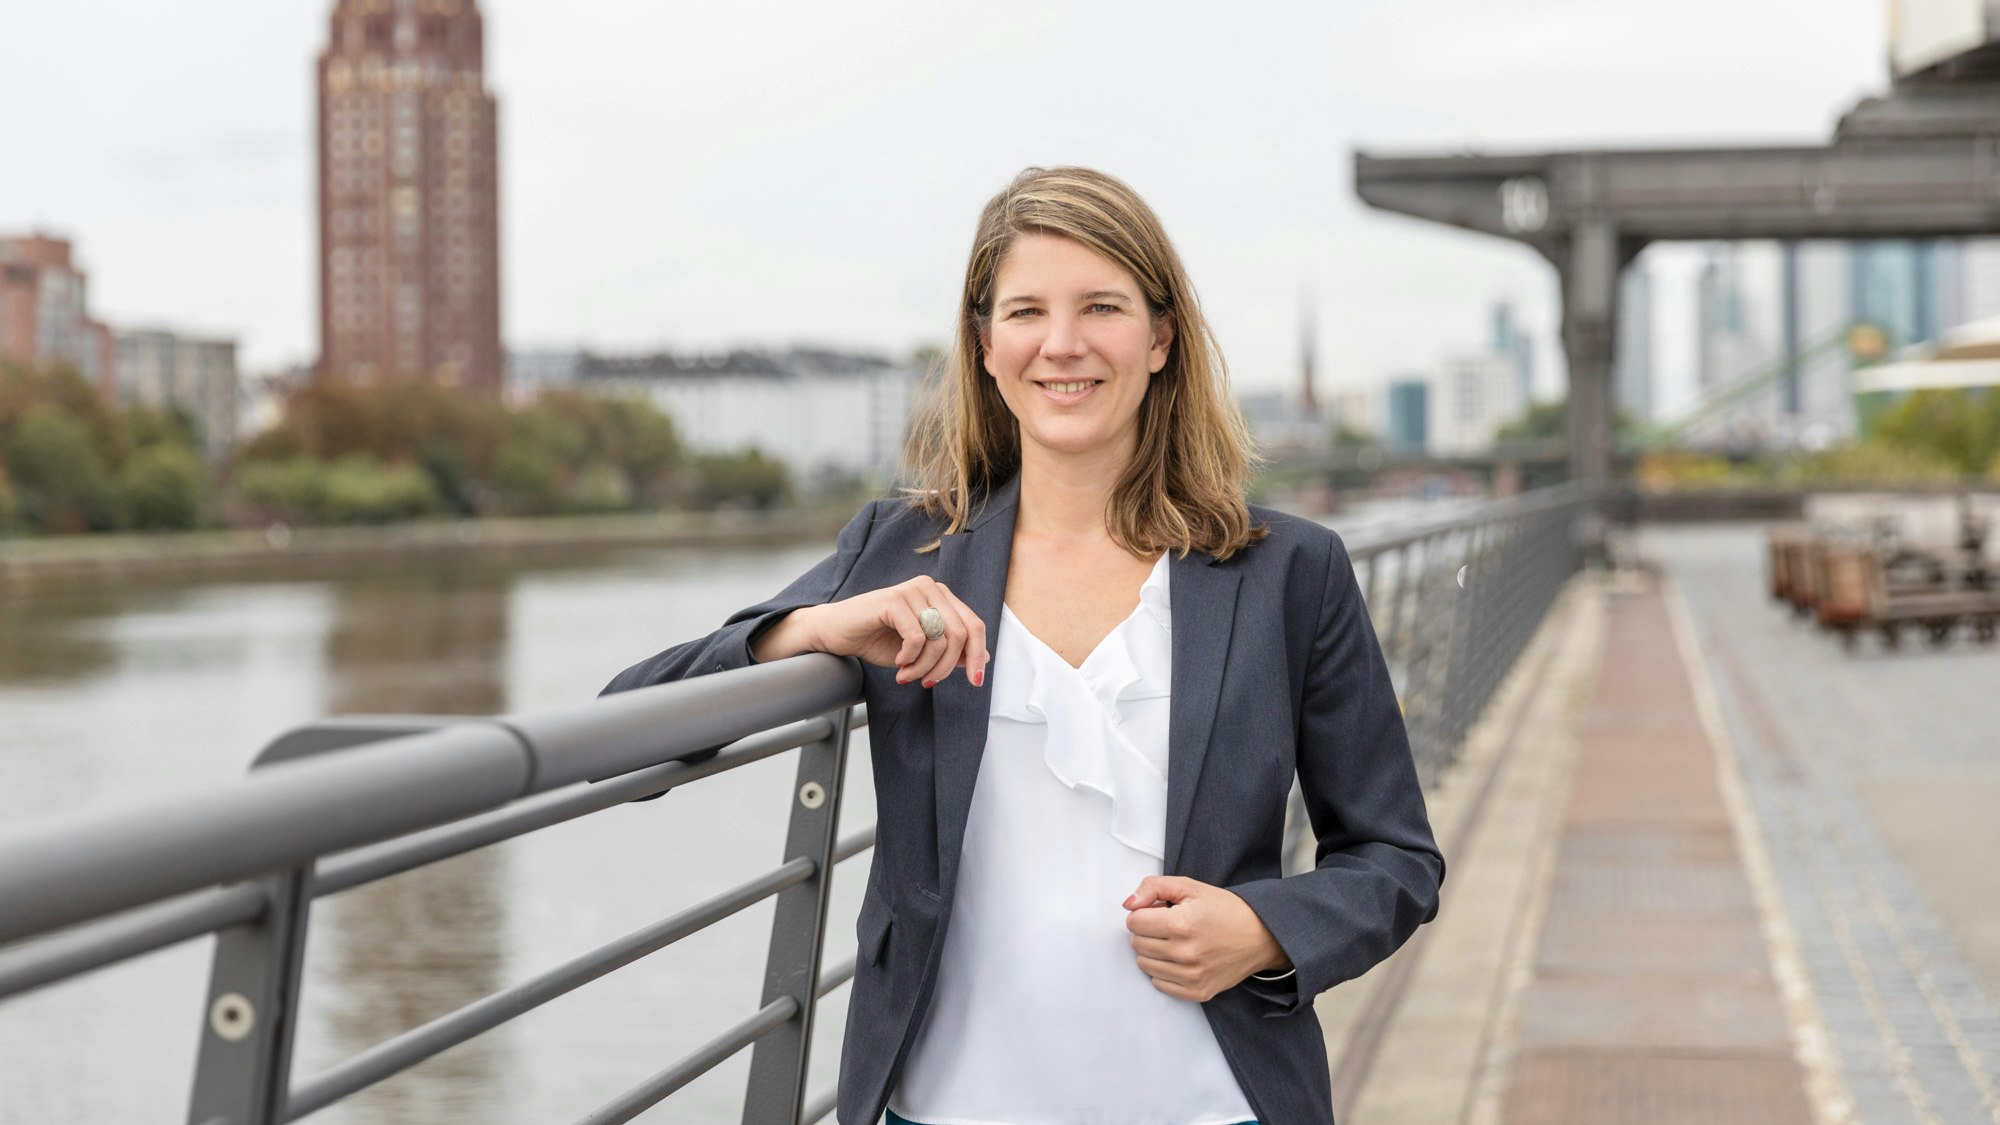 Isabel Schiller is standing next to a high railing next to a big river in a city.